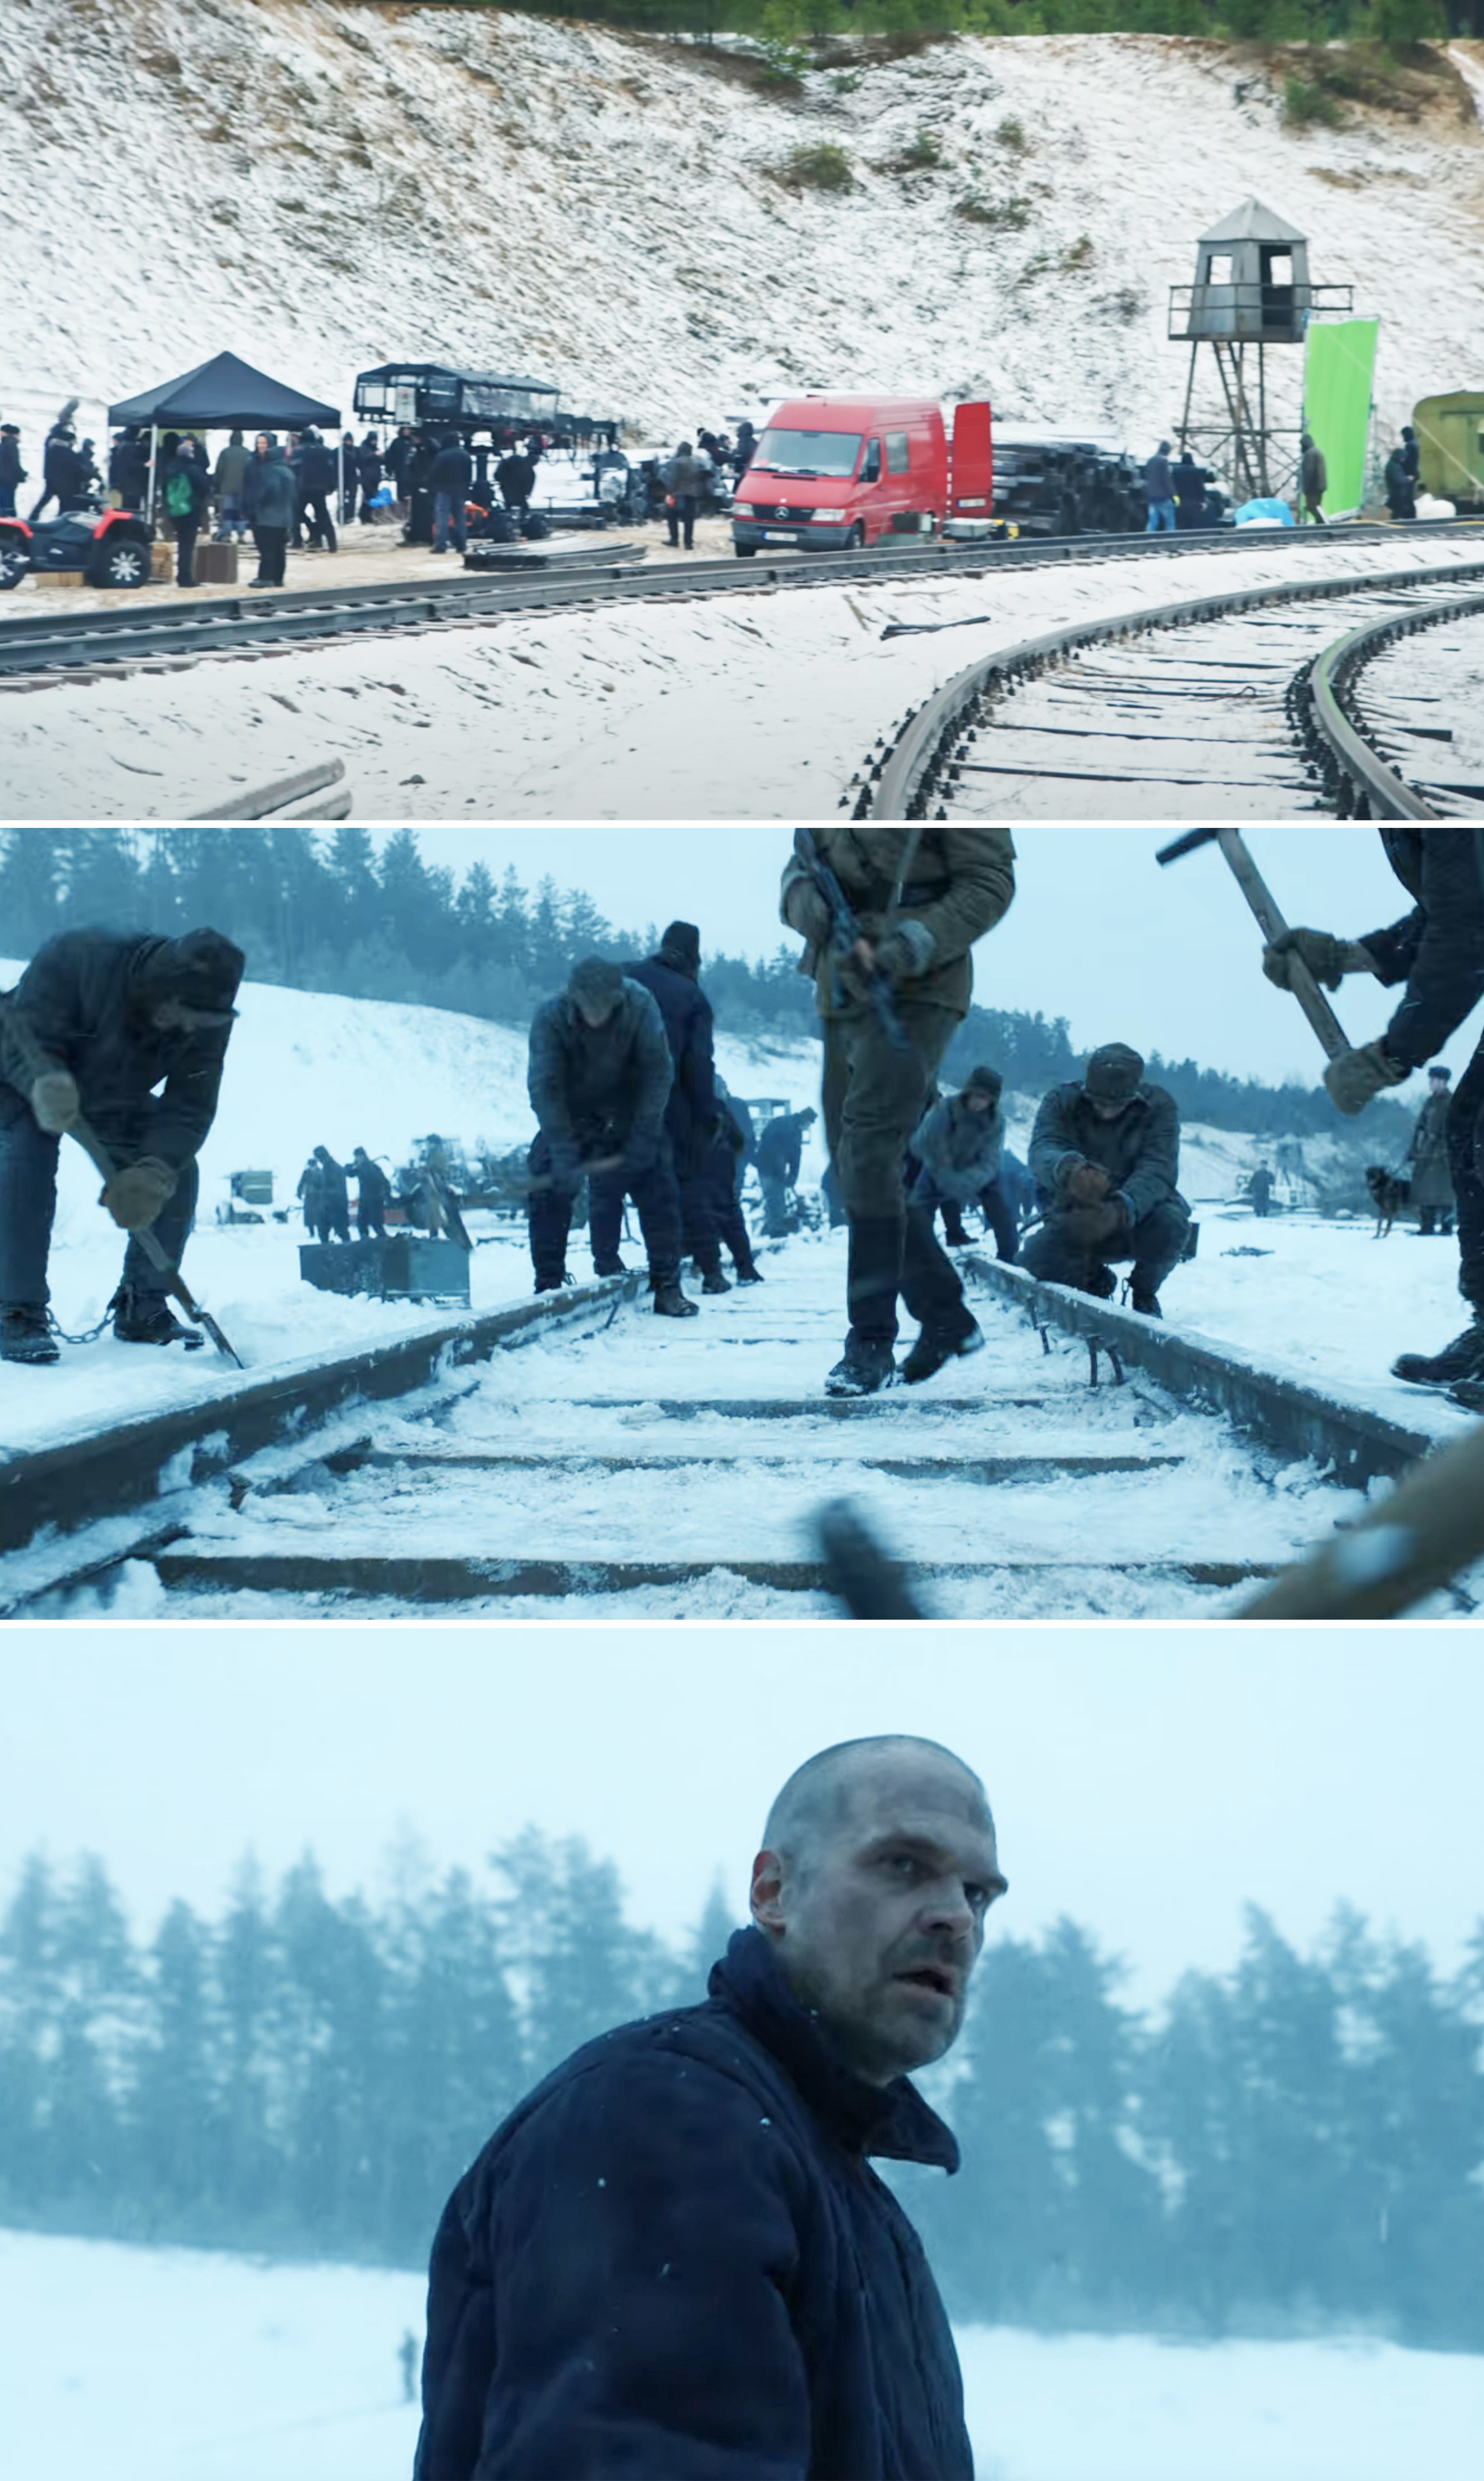 Crew members standing in the snow and near train tracks